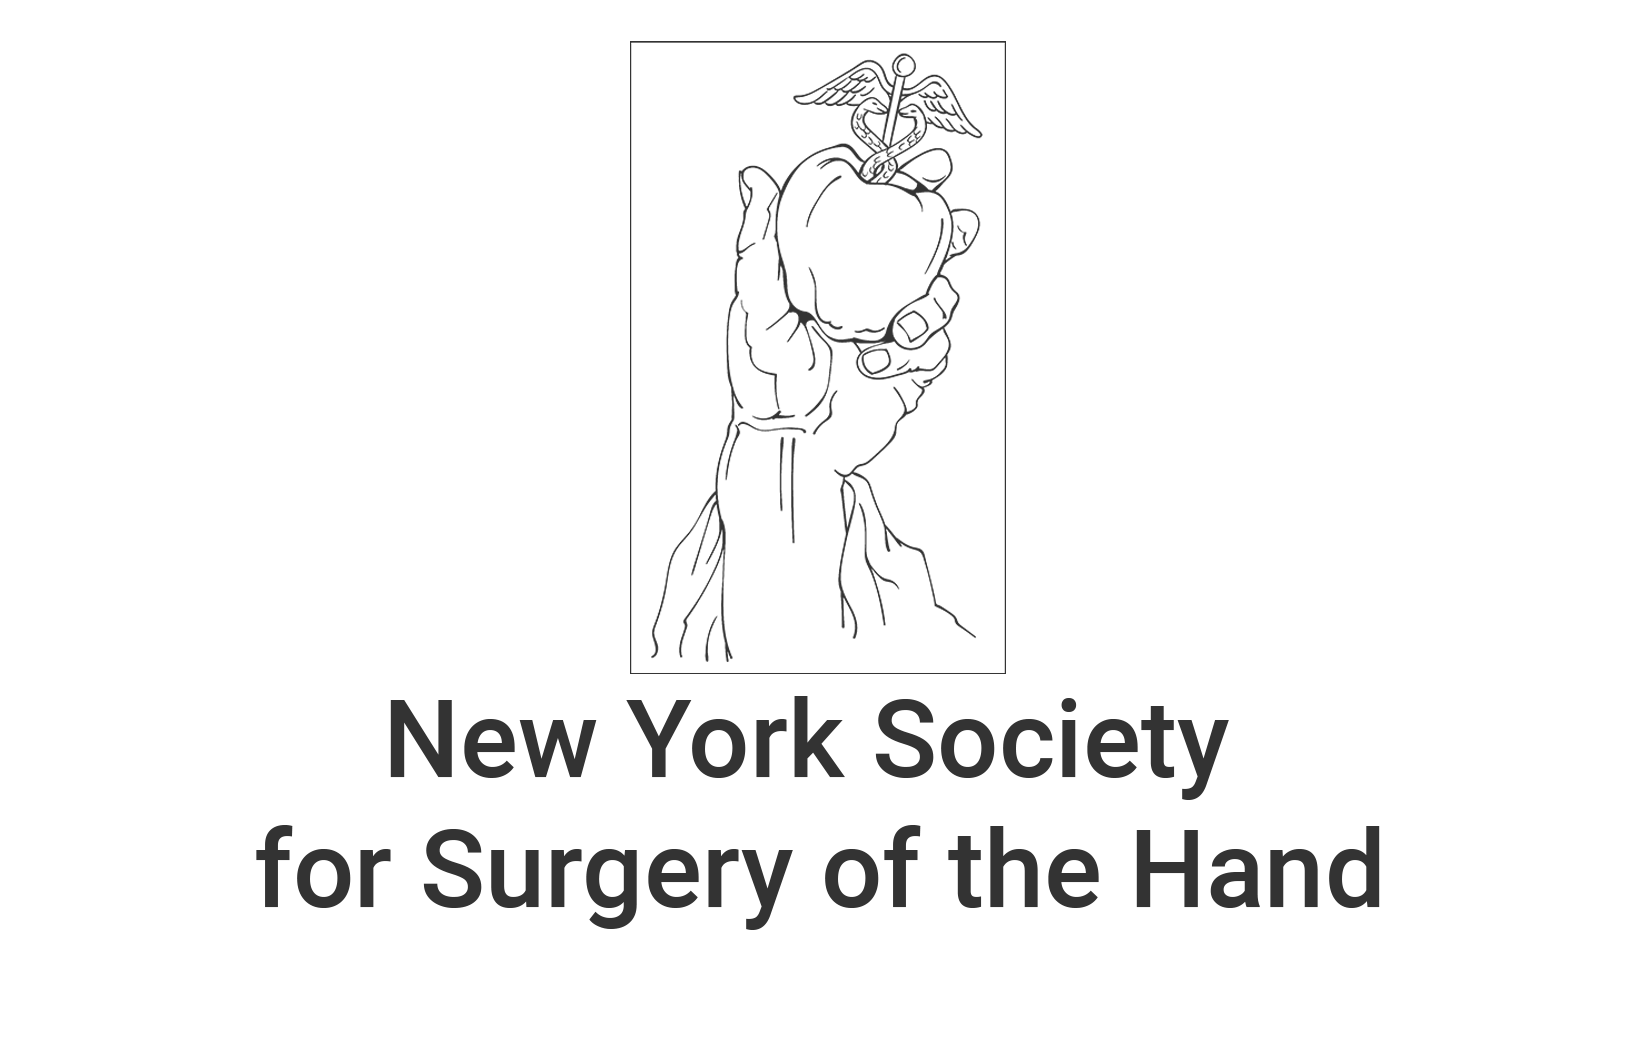 New York Society for Surgery of the Hand